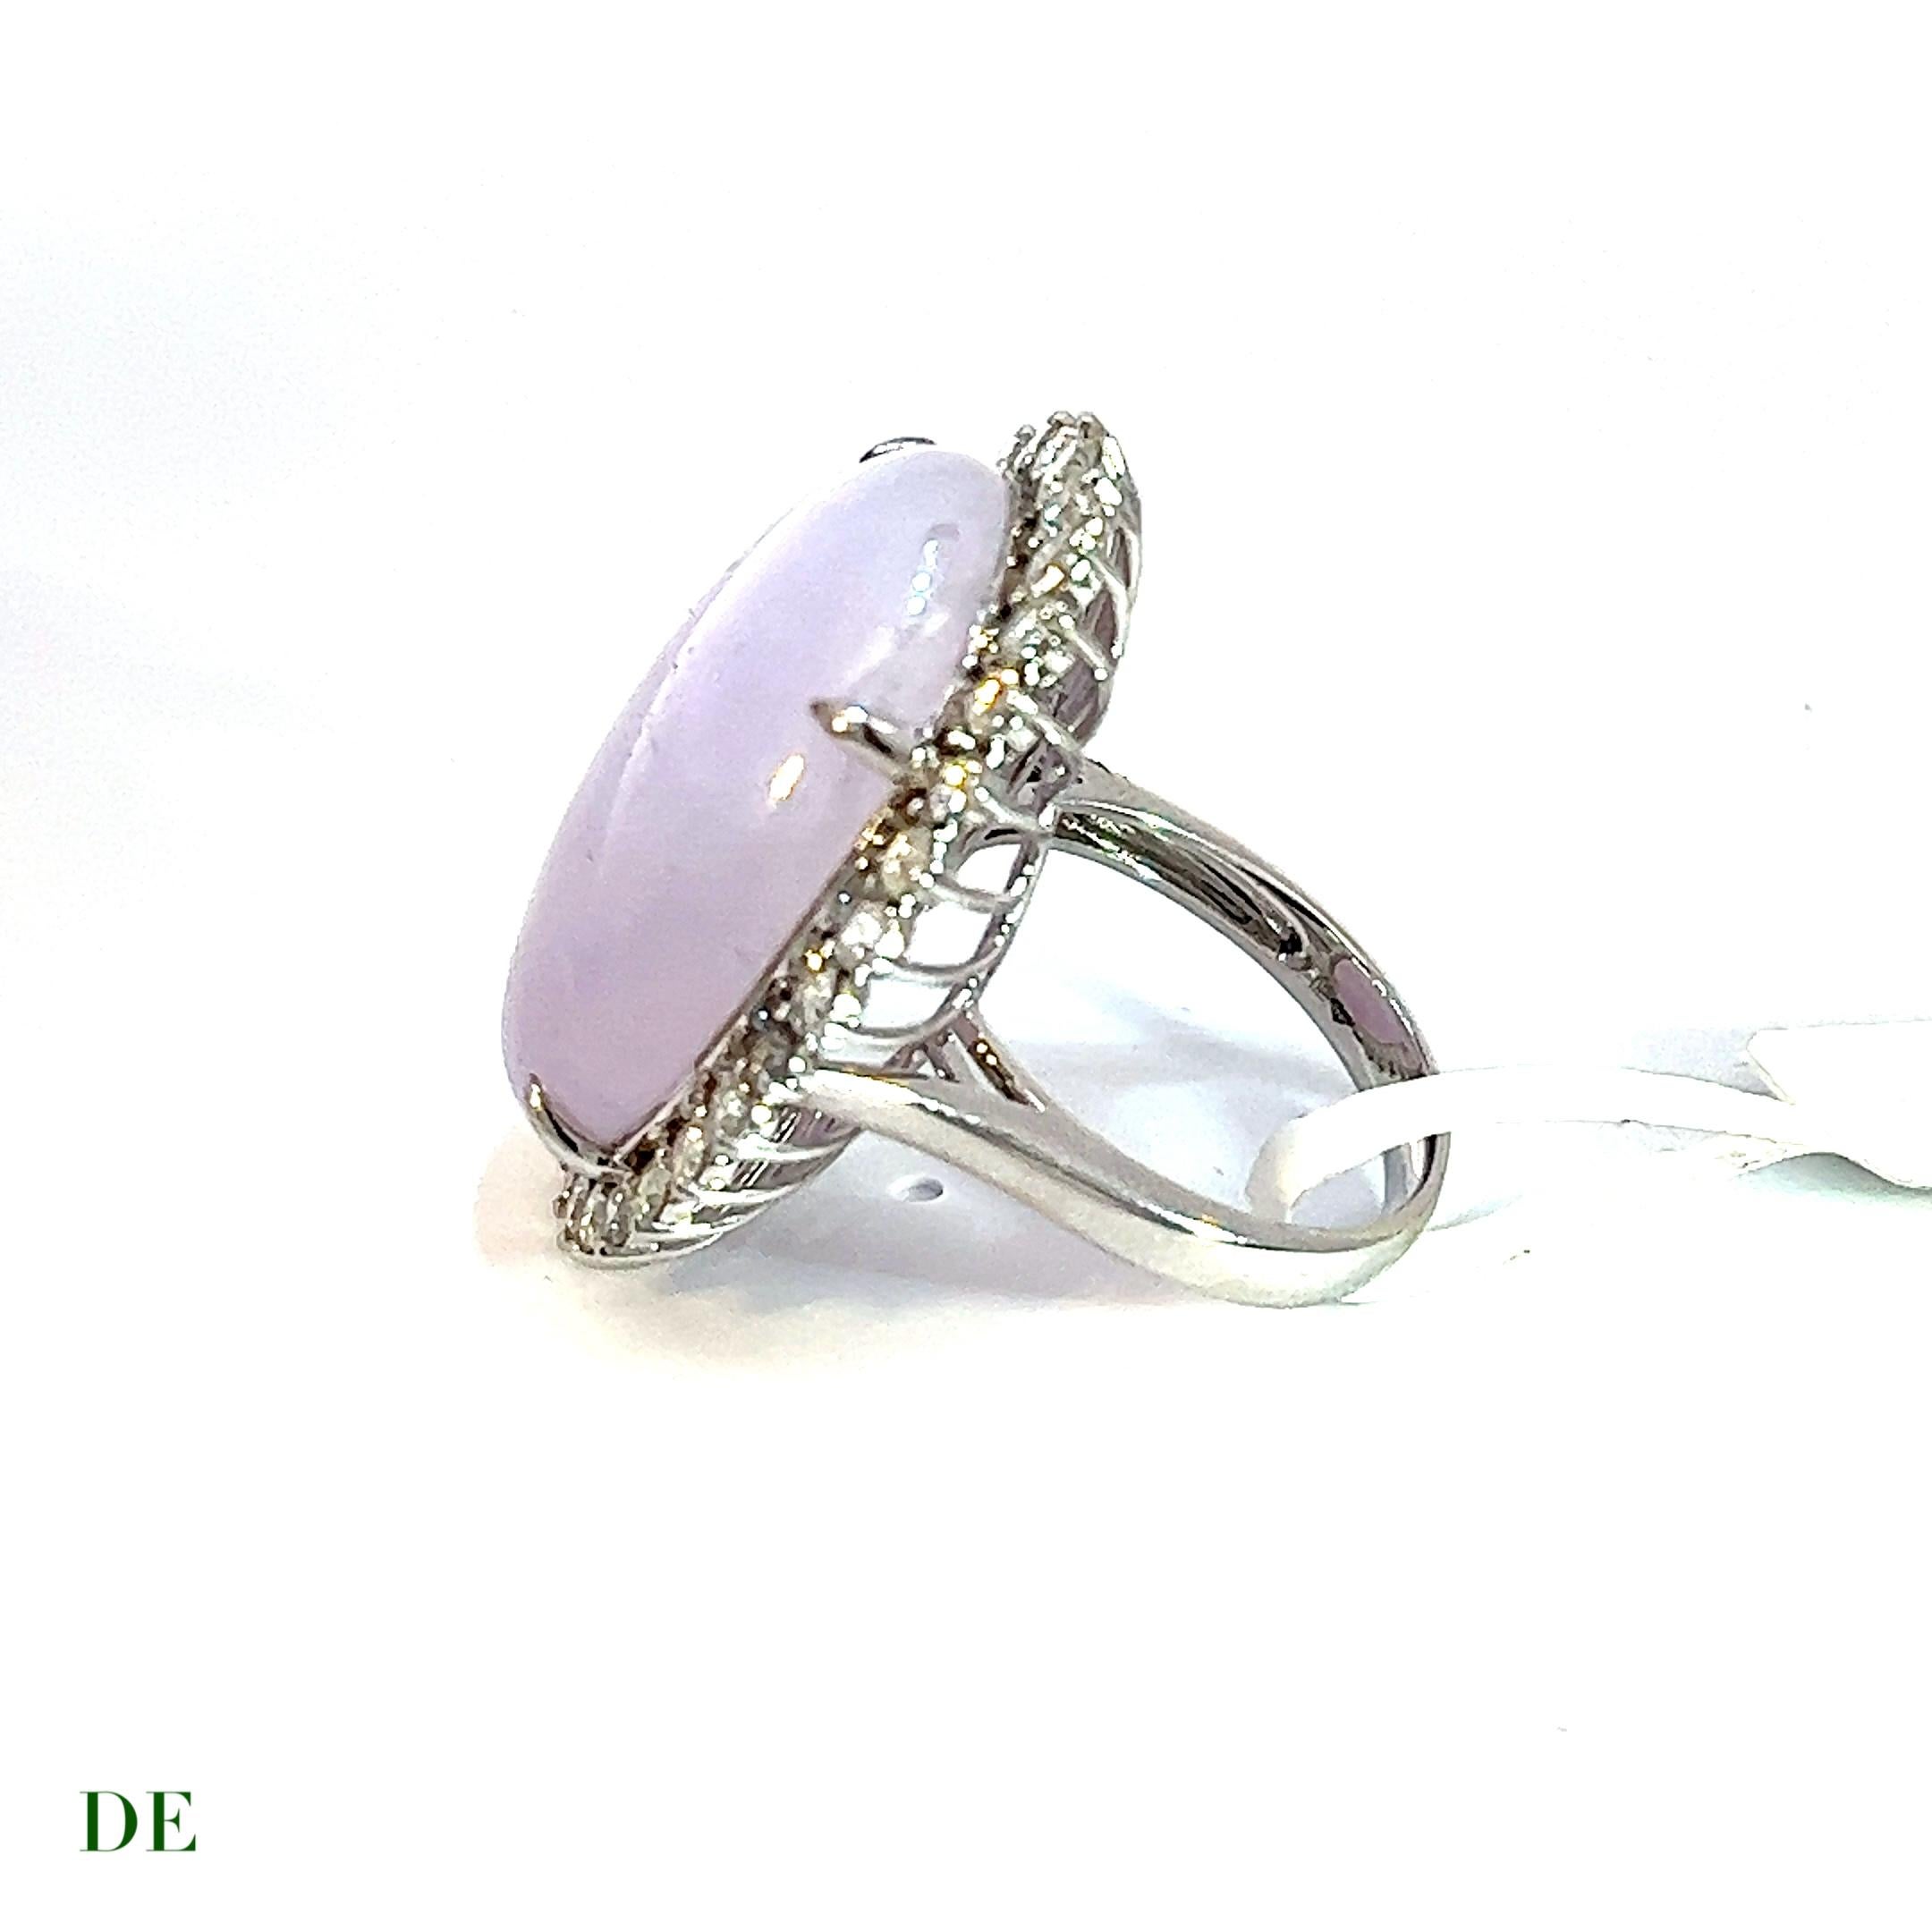 This rare and classic lavender jade and diamond cocktail ring is a true masterpiece that exudes luxury and elegance. The centerpiece of the ring is a stunning lavender jade gemstone that weighs an impressive 29.95 carats and boasts a soft and